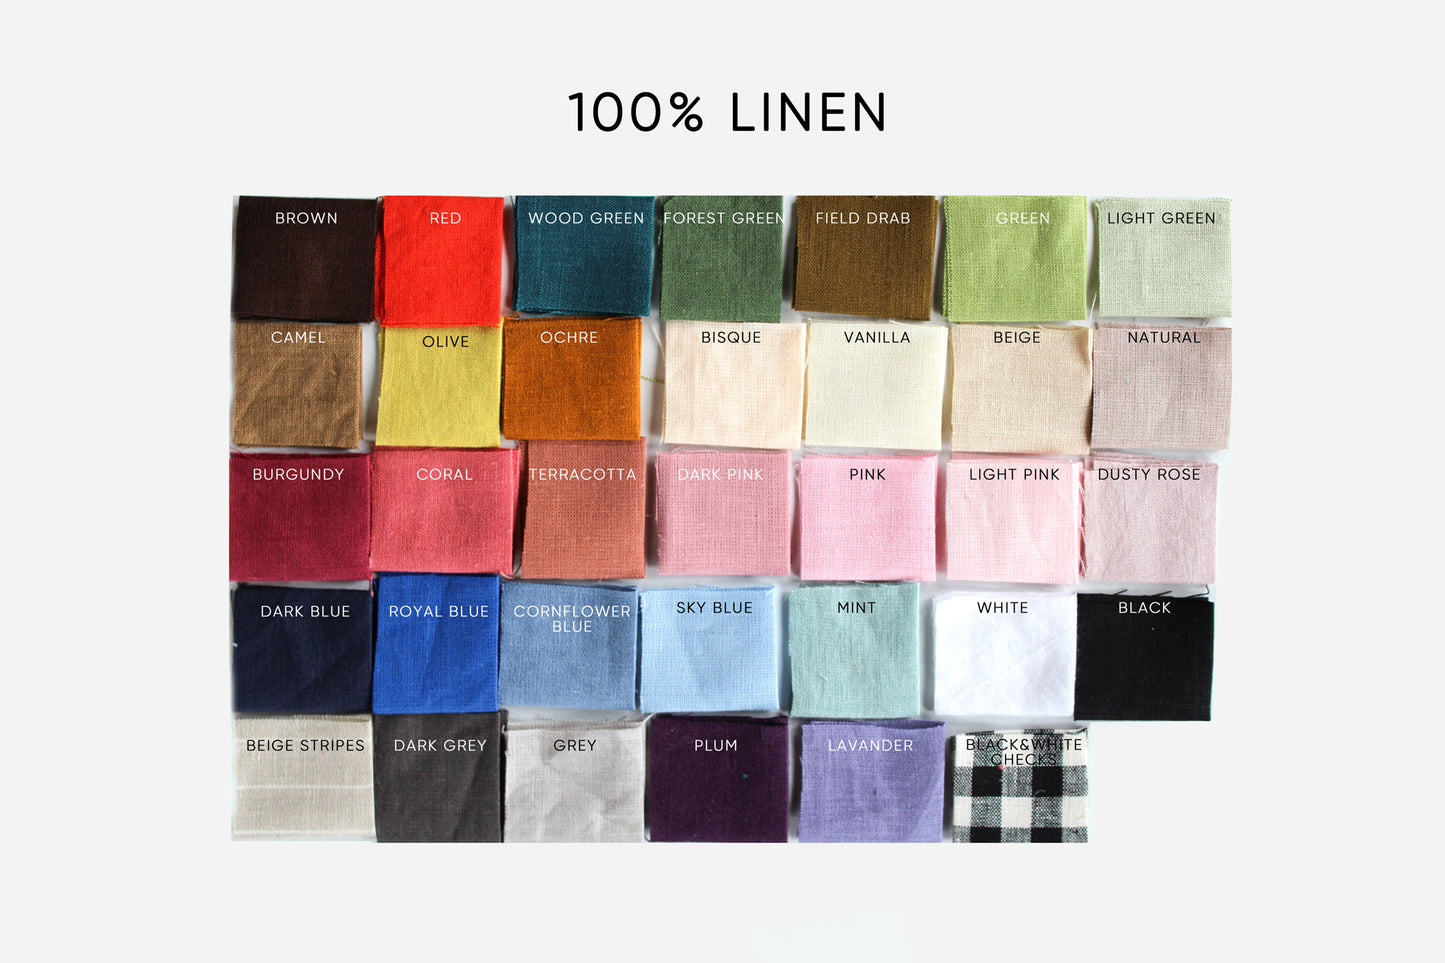 Samples of the linen fabric 